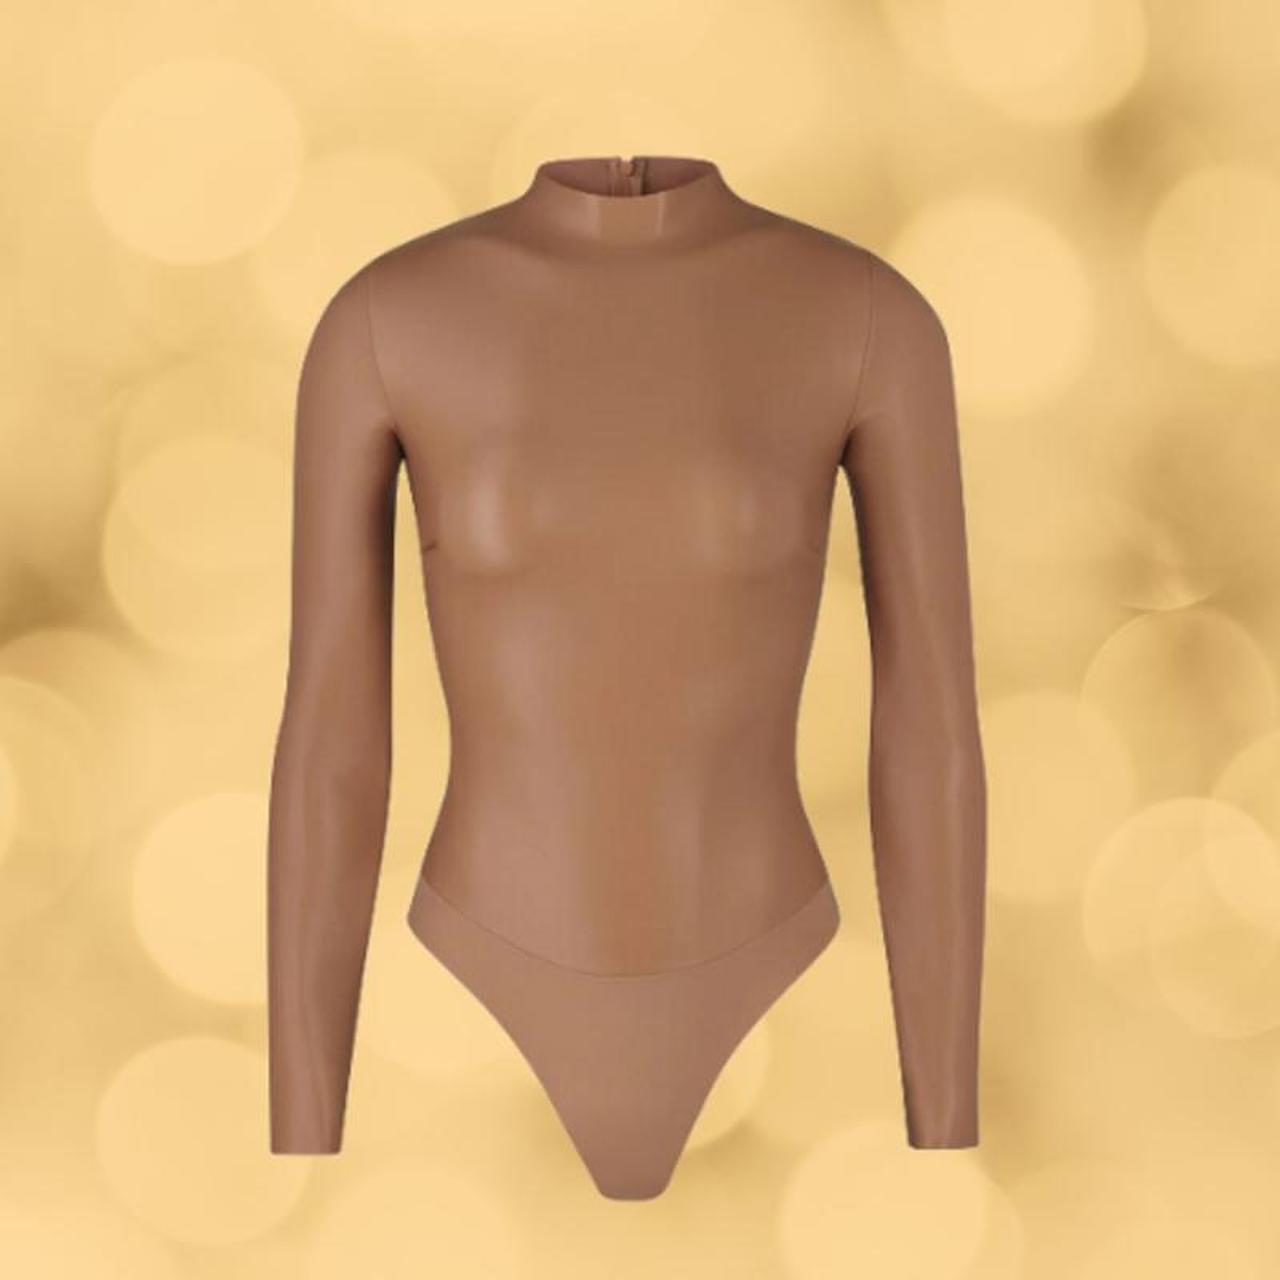 Track Faux Leather Scoop Bodysuit - Sienna - XXS at Skims